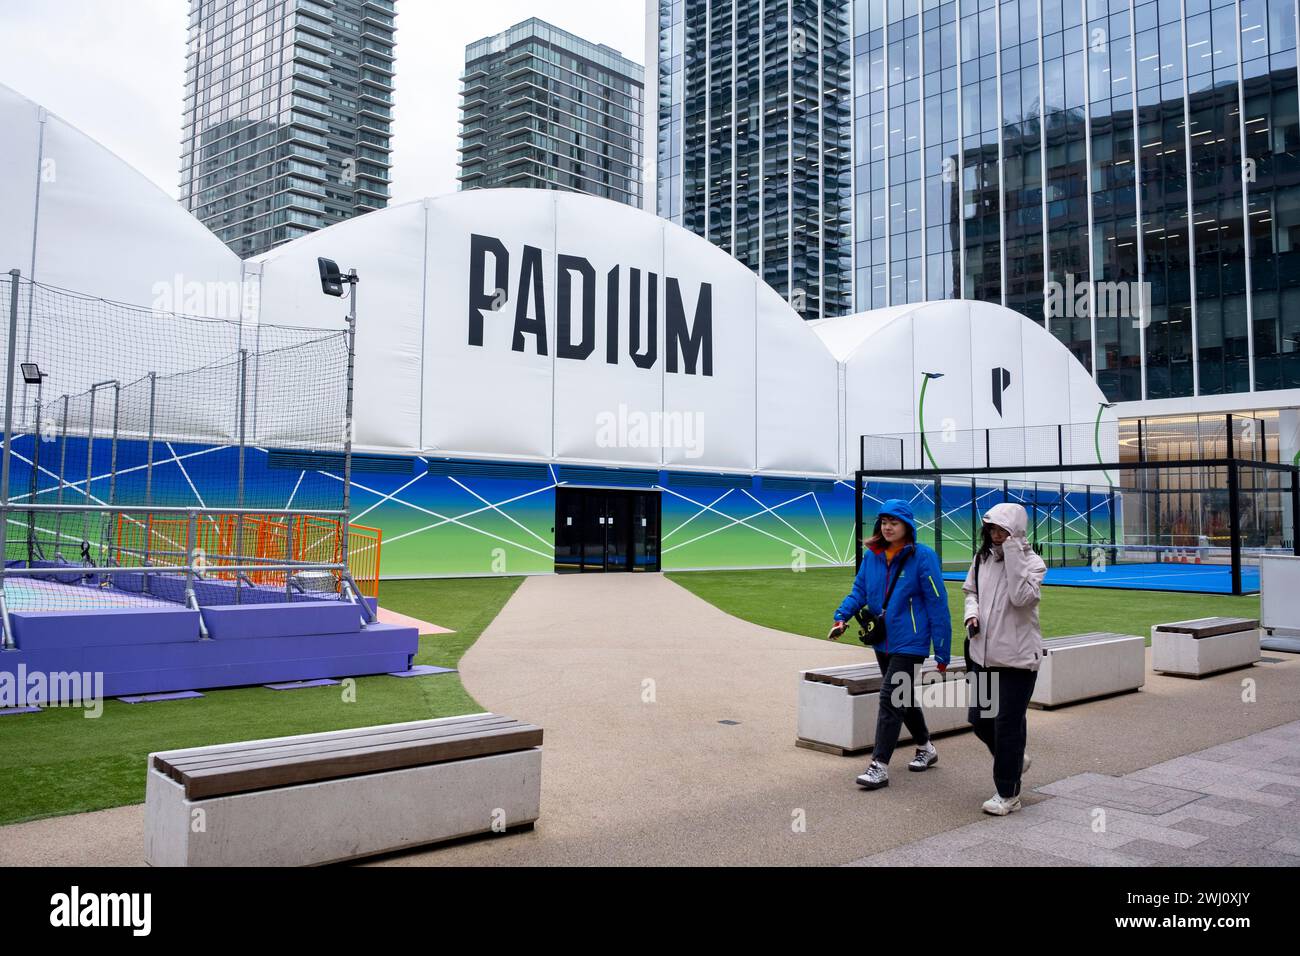 Padel tennis club Padium  at the heart of Canary Wharf financial district on 6th February 2024 in London, United Kingdom. Canary Wharf is an area located near the Isle of Dogs in the London Borough of Tower Hamlets and is defined by the Greater London Authority as being part of Londons central business district. Along with the City of London, it constitutes one of the main financial centres in the United Kingdom and the world, containing many high-rise buildings including the third-tallest in the UK, One Canada Square. Stock Photo